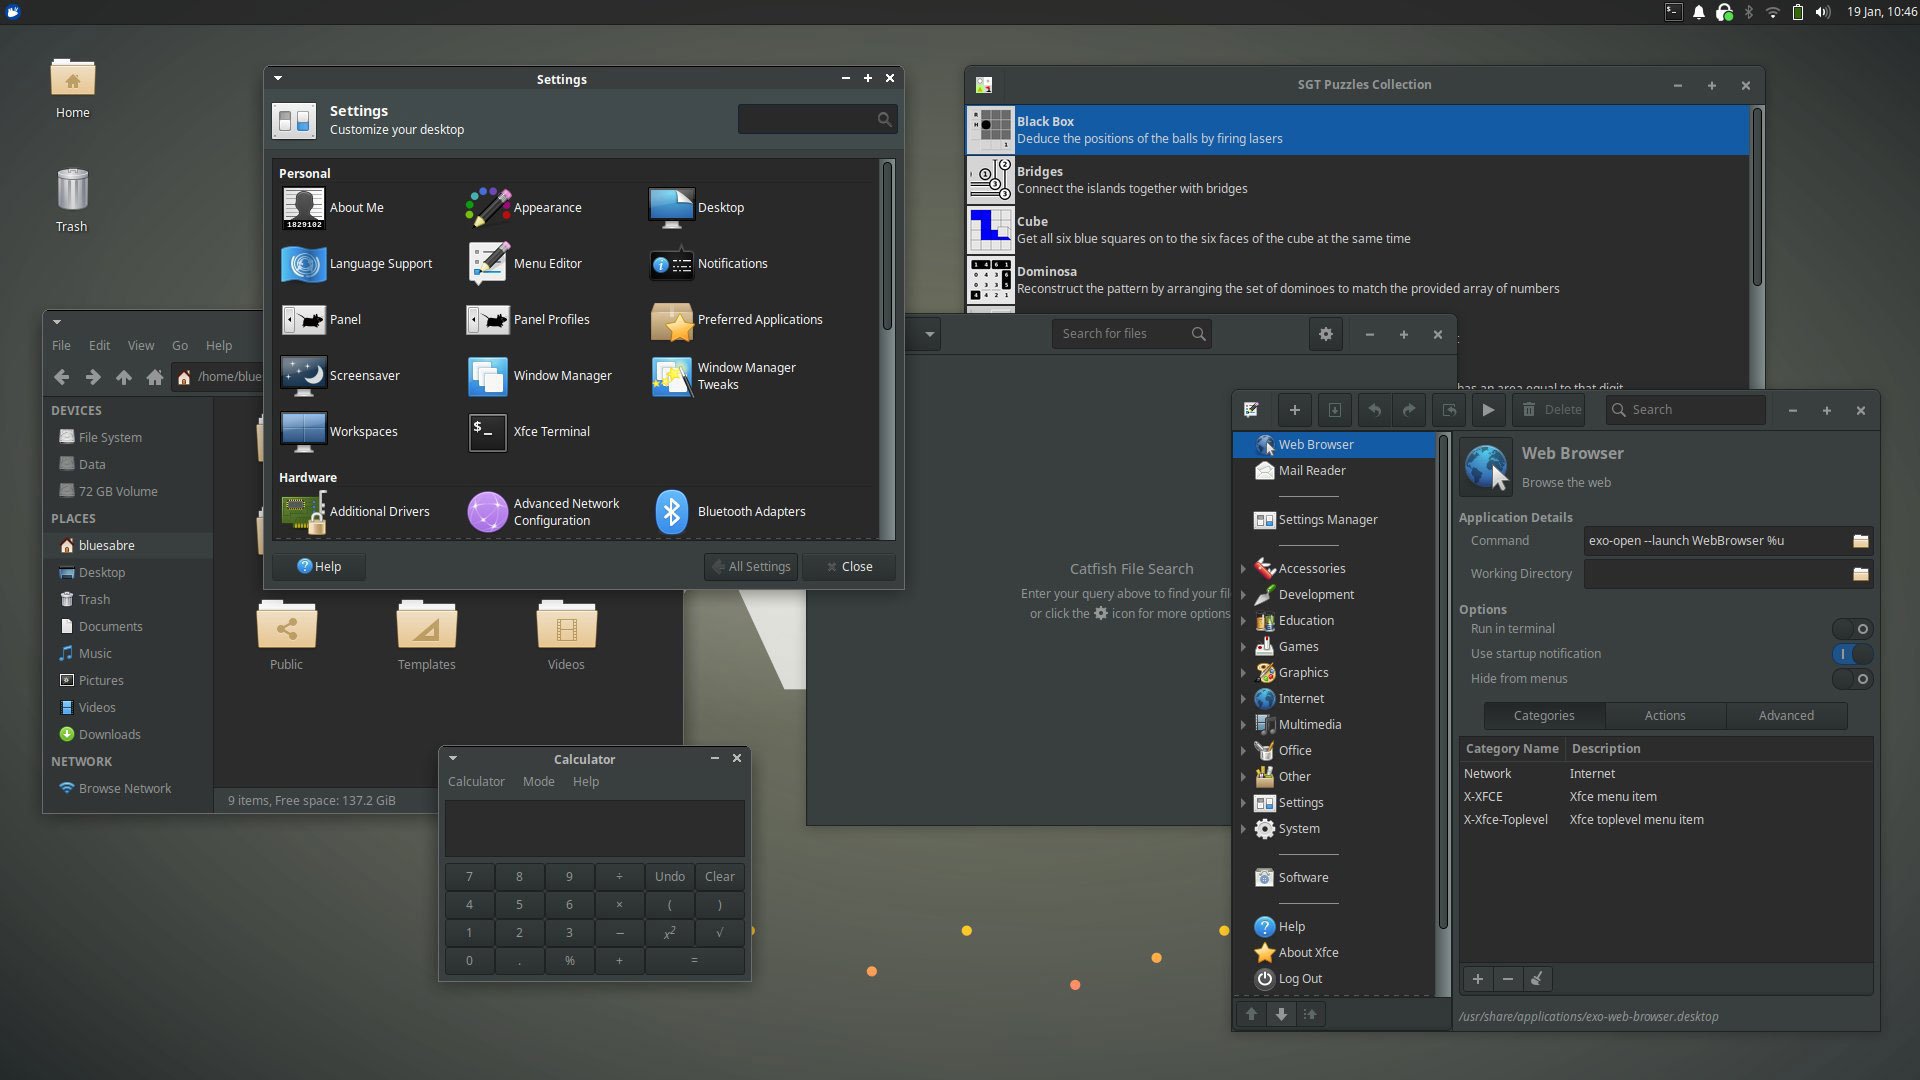 Xubuntu has made a video to show off its newest release